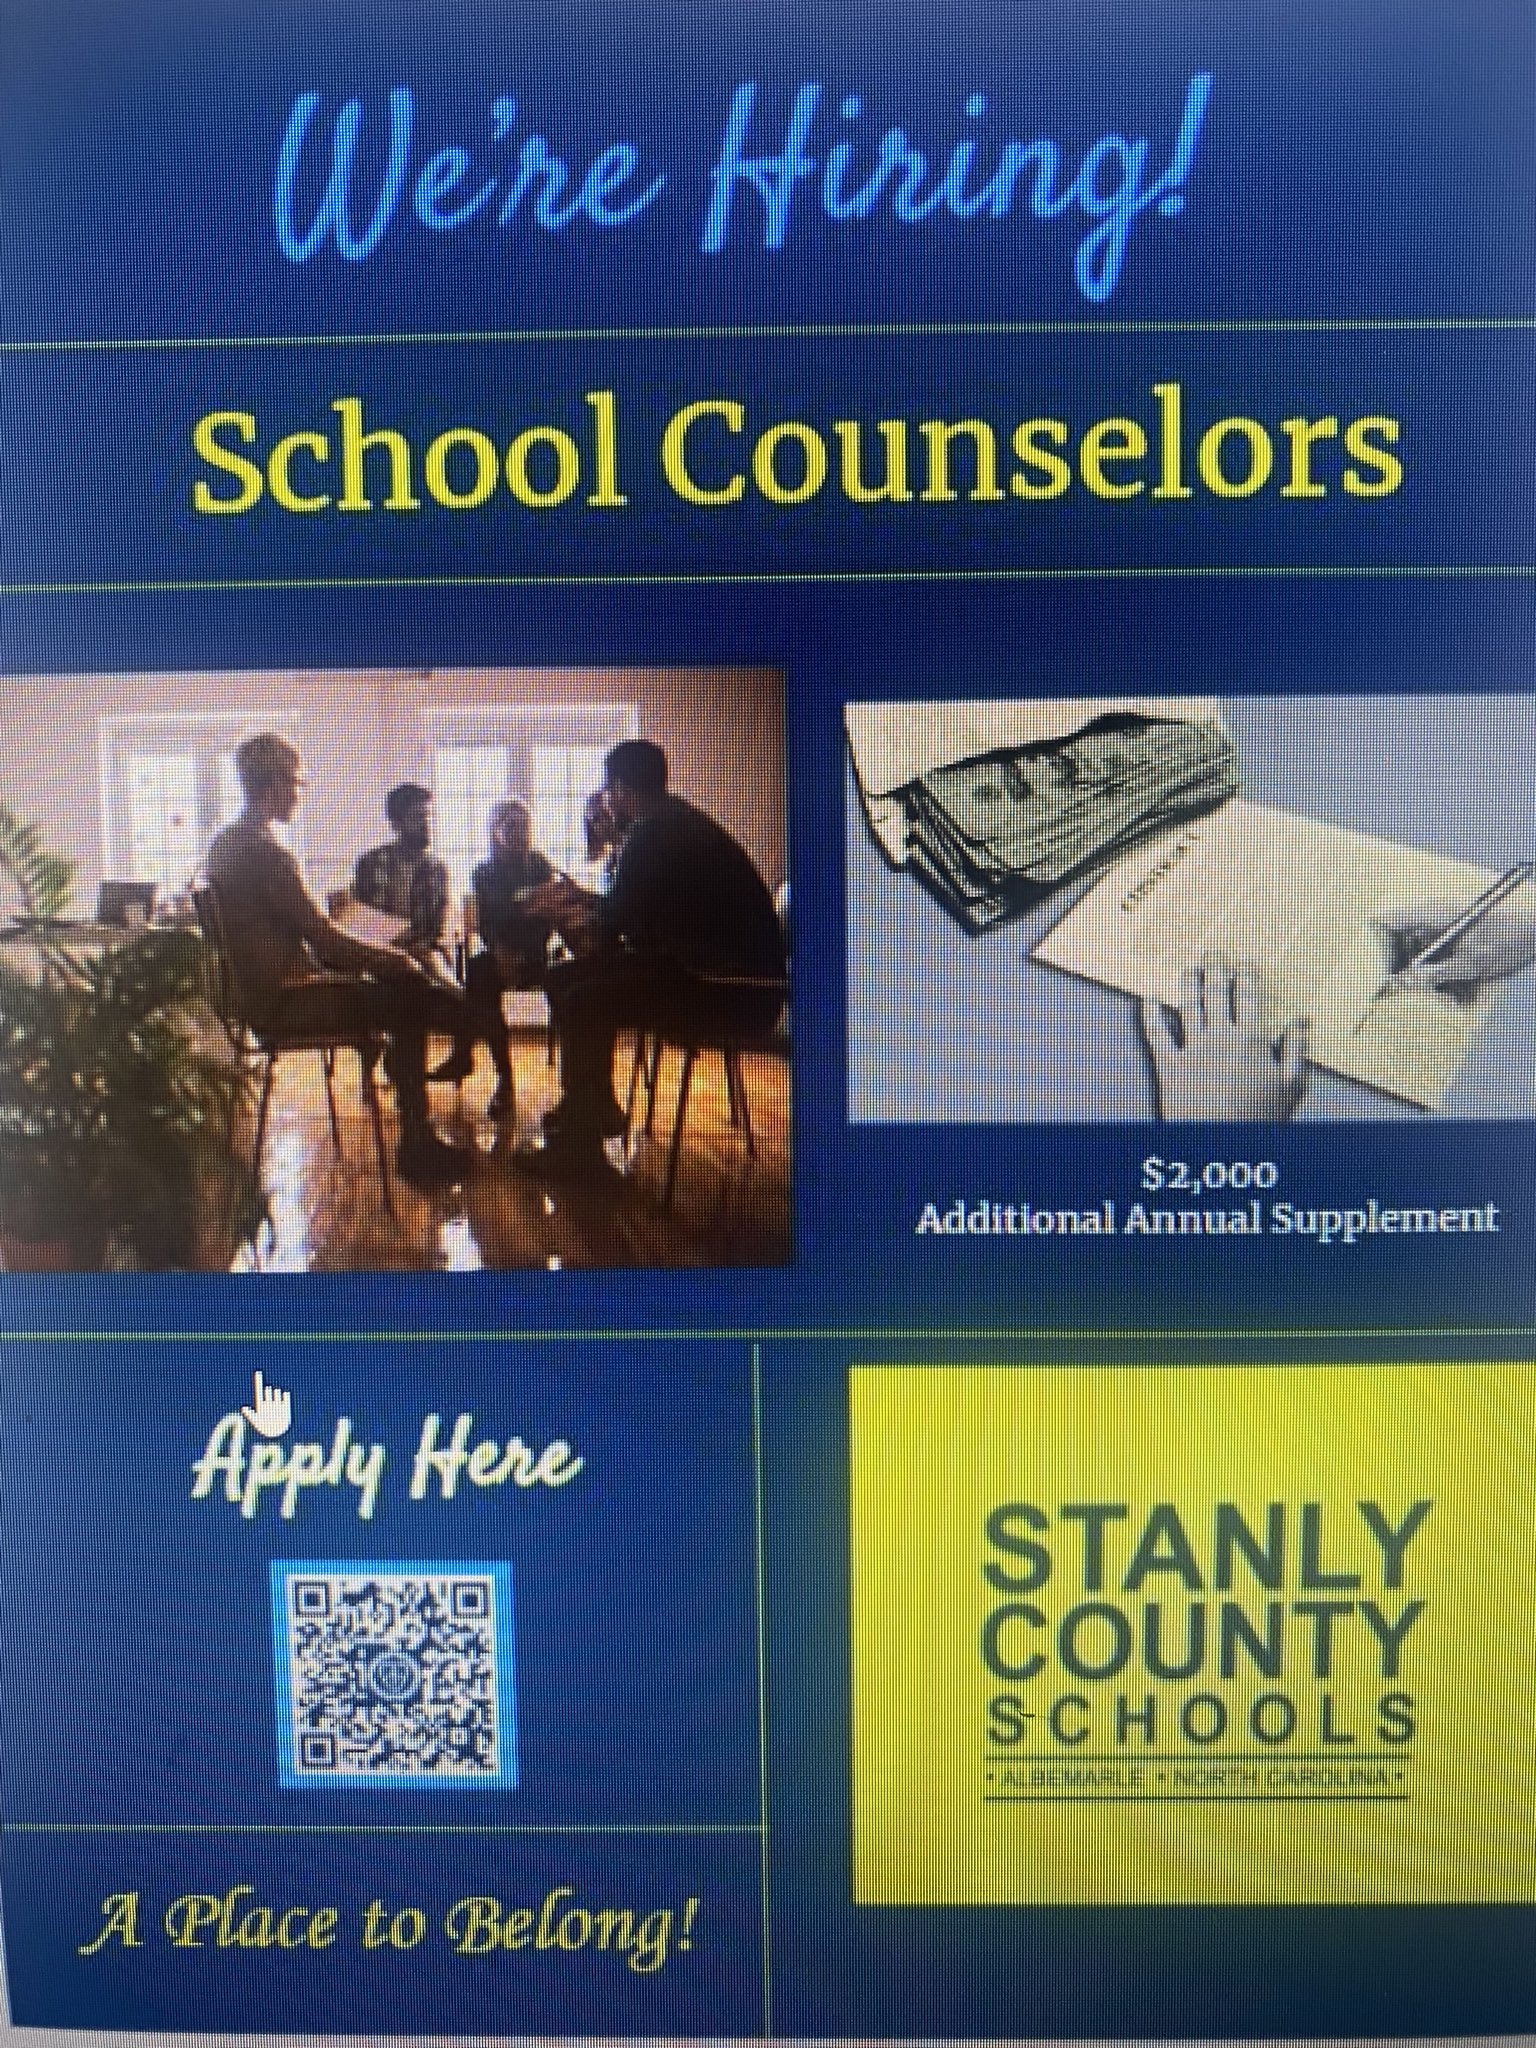 Hiring Now!  Stanly County Schools